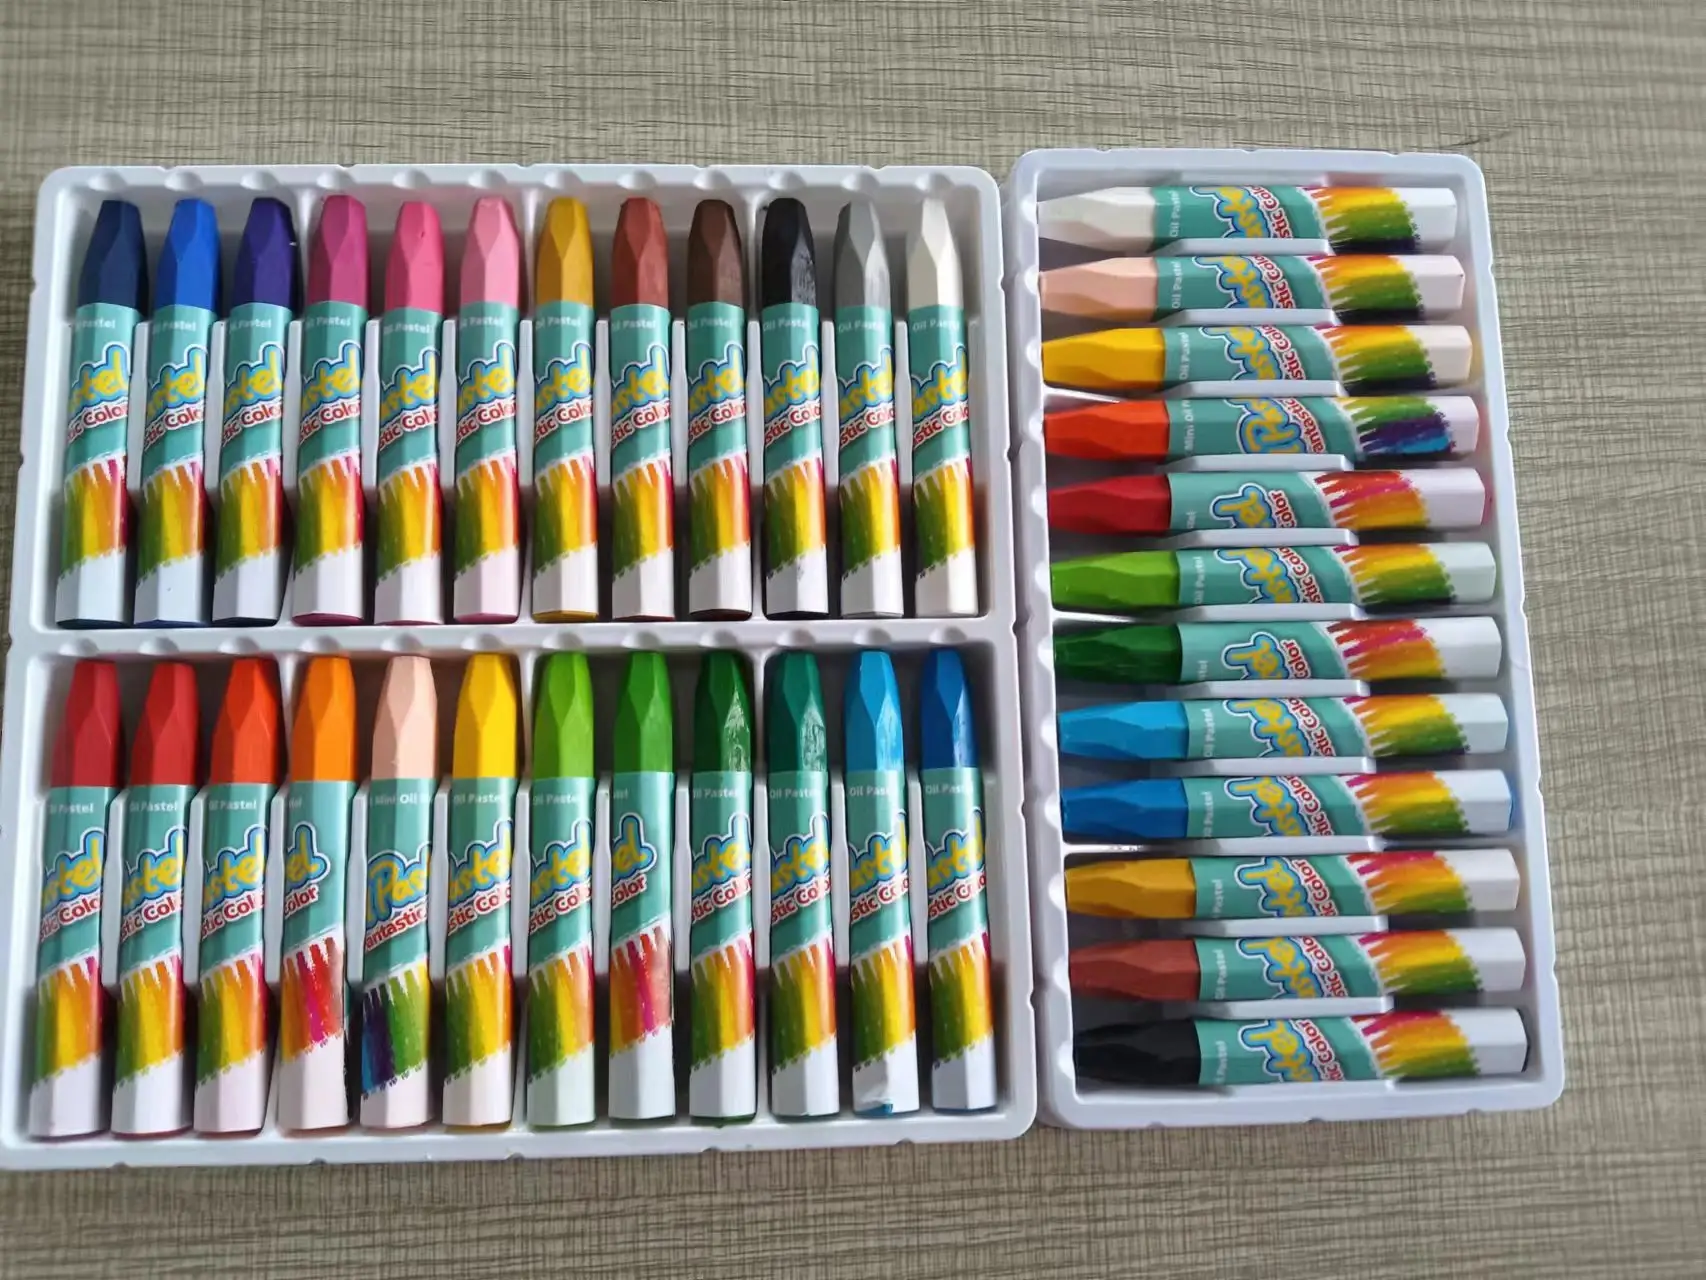 Children and school painting set Art painting Multicolor drawing crayons 24 Colors heavy oil pastel colors